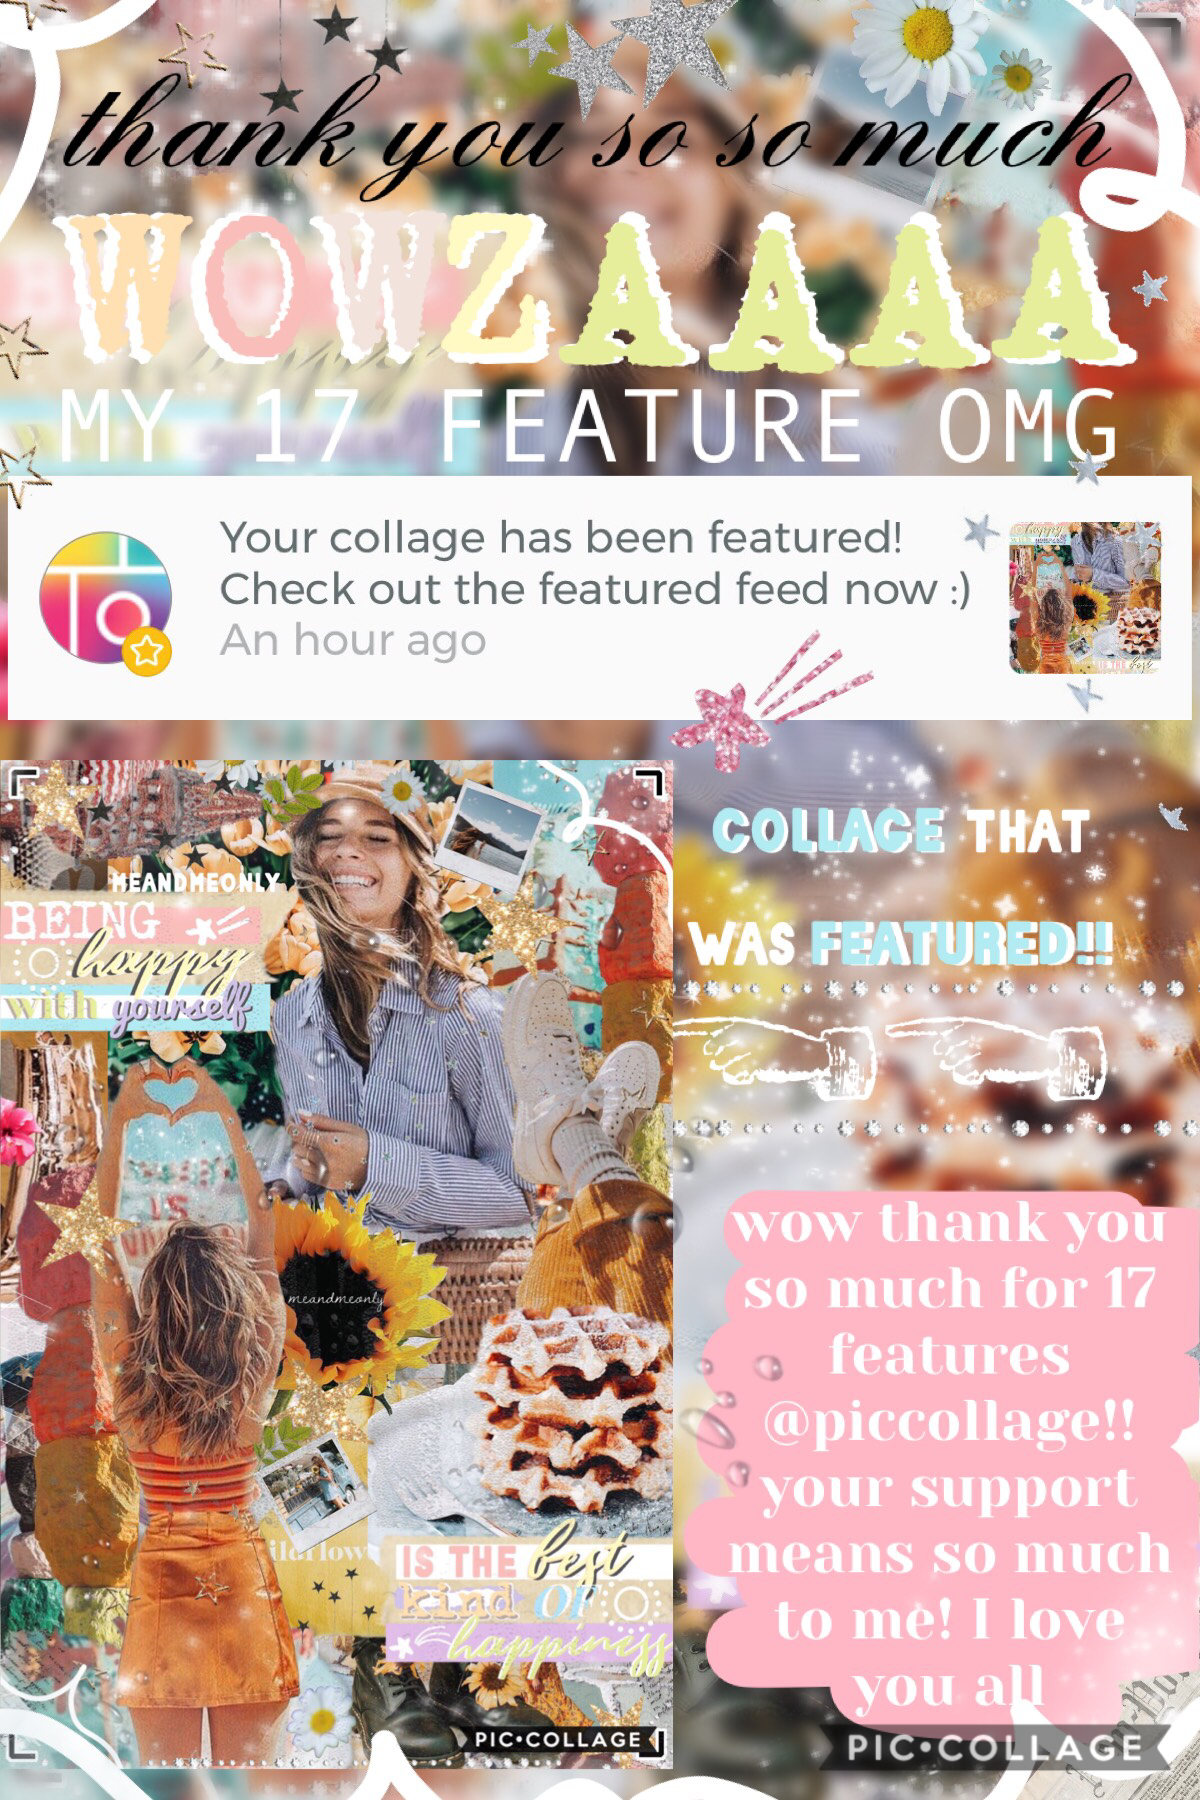 woah omg thank you for 17 features @piccollage💫❤️ I just want to thank each and every one of my followers for bringing joy in my life and supporting me💞i love you all so so much🥰also I’m working on a christmas edit, gonna post soon, also spread love💓🌸